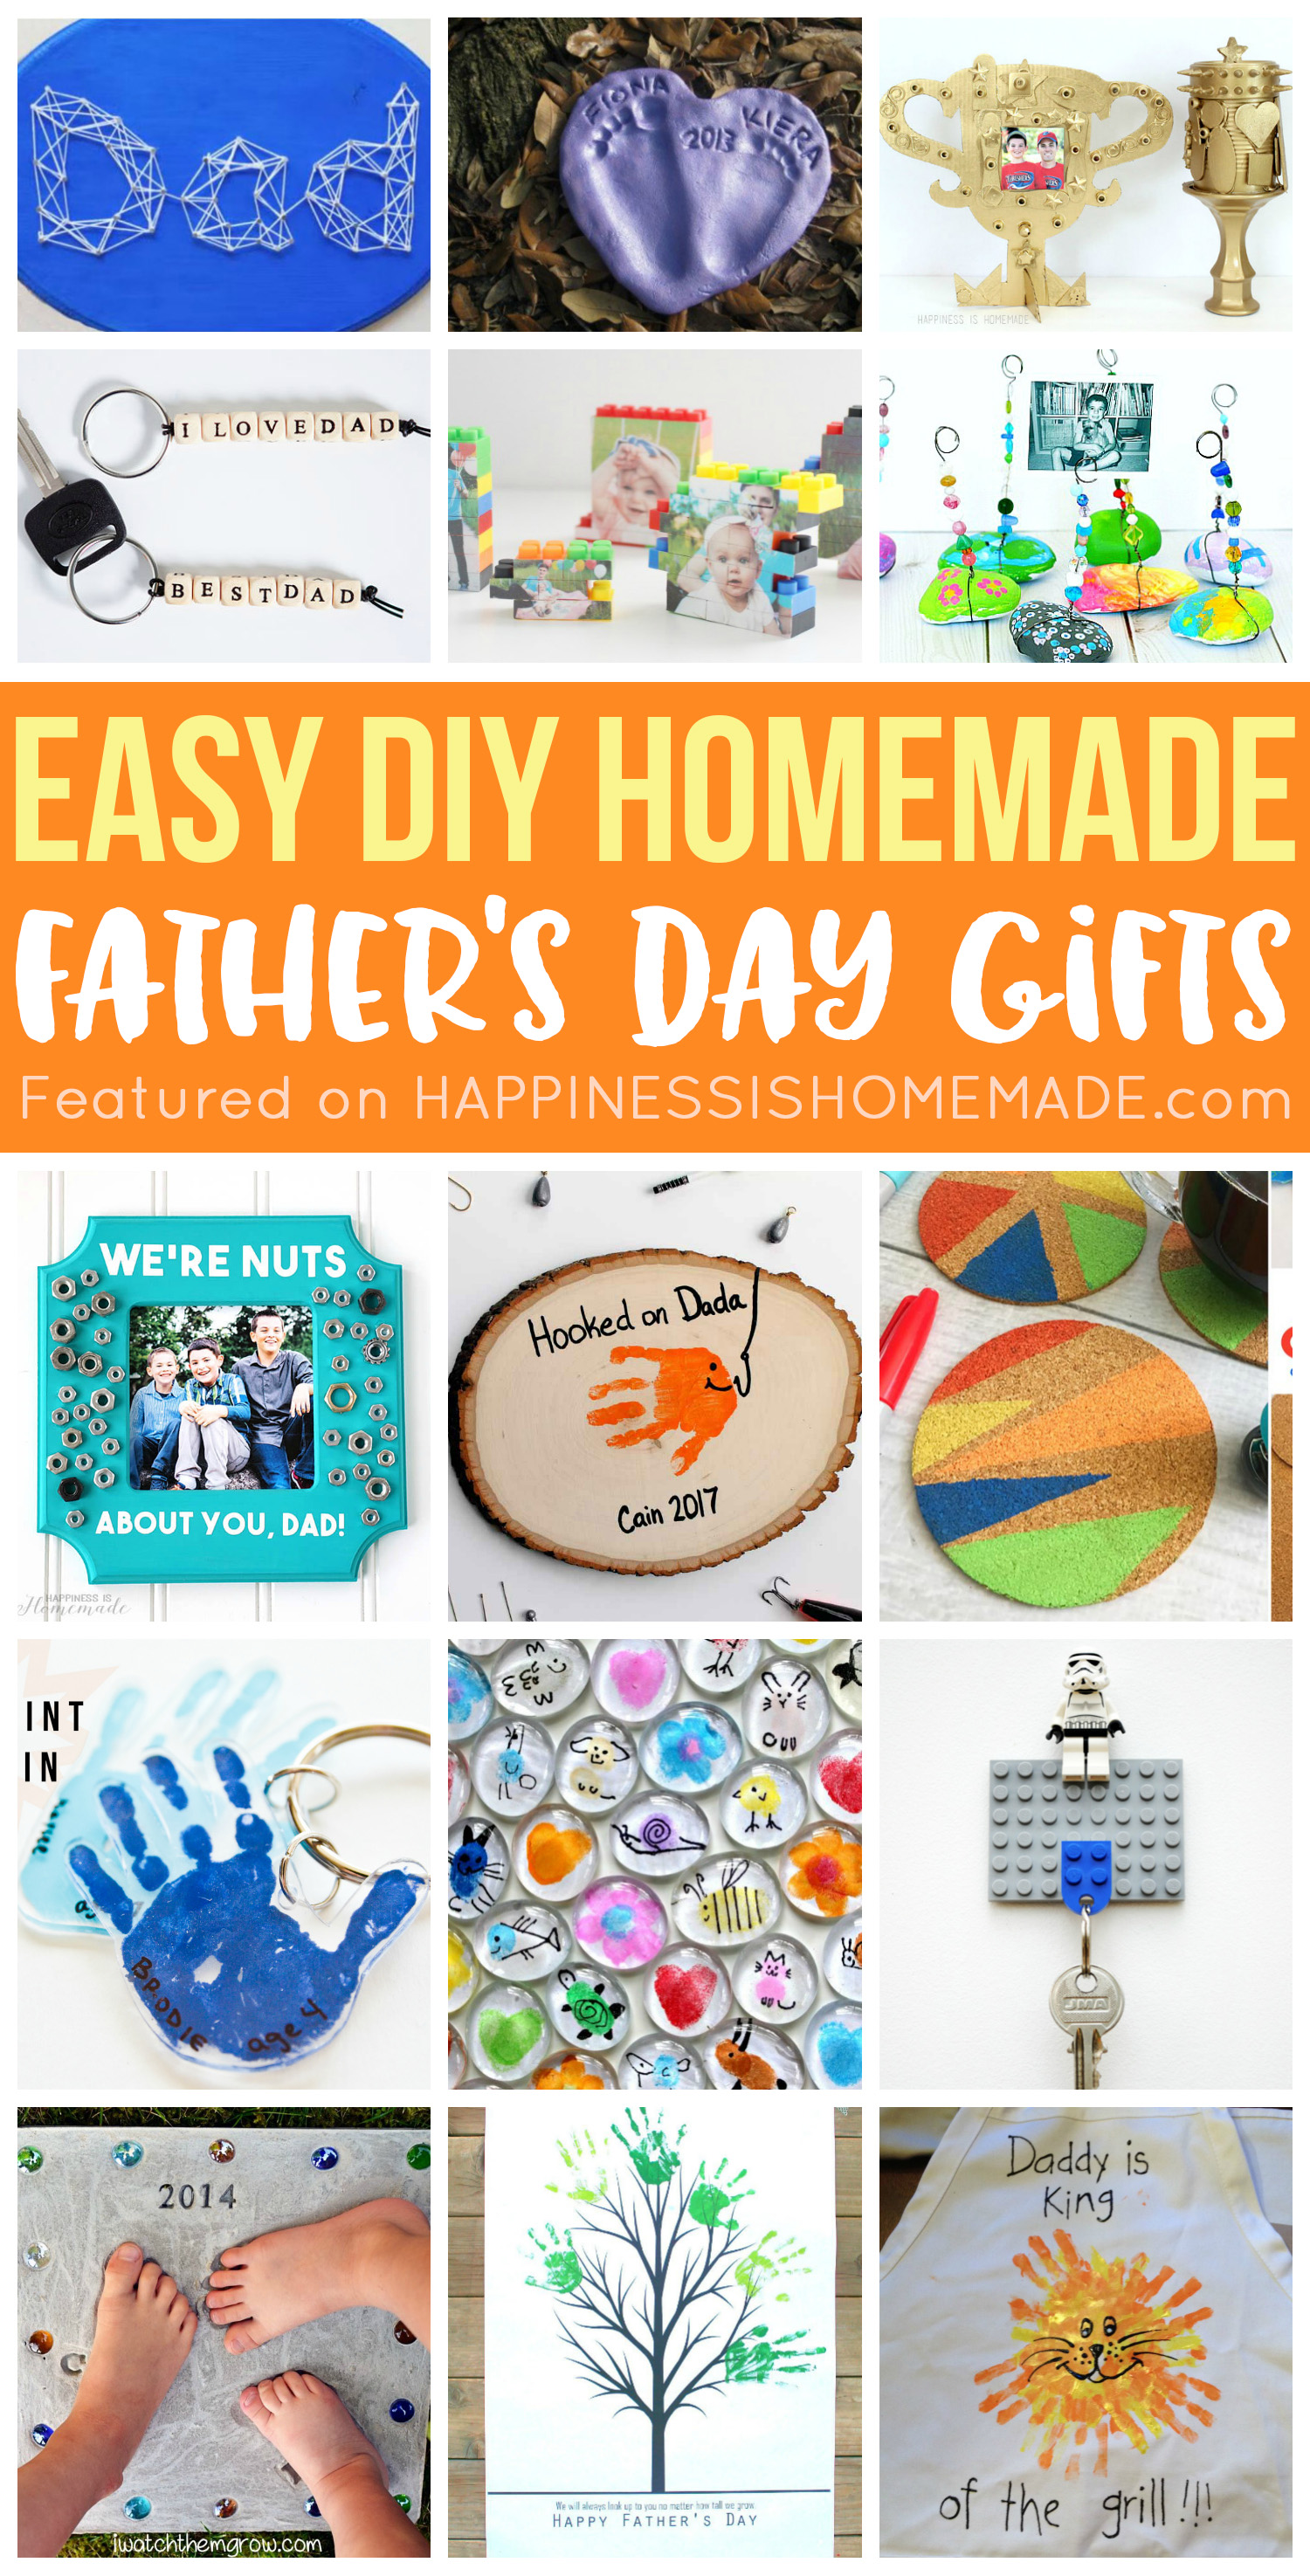 11 creative Father's Day gifts for hard-to-shop-for dads